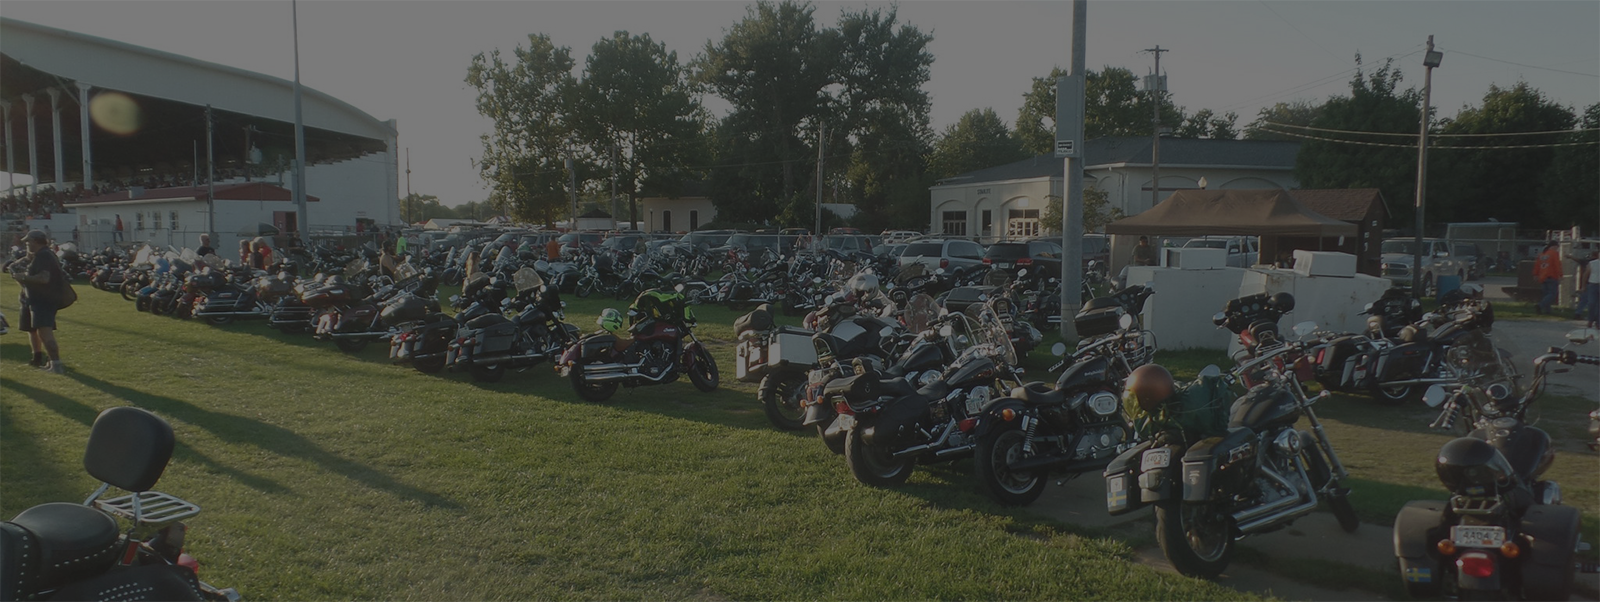 Chief Blackhawk Davenport Fall International Meet with hundreds of motorcycles at or near the Mississippi Valley Fairgrounds